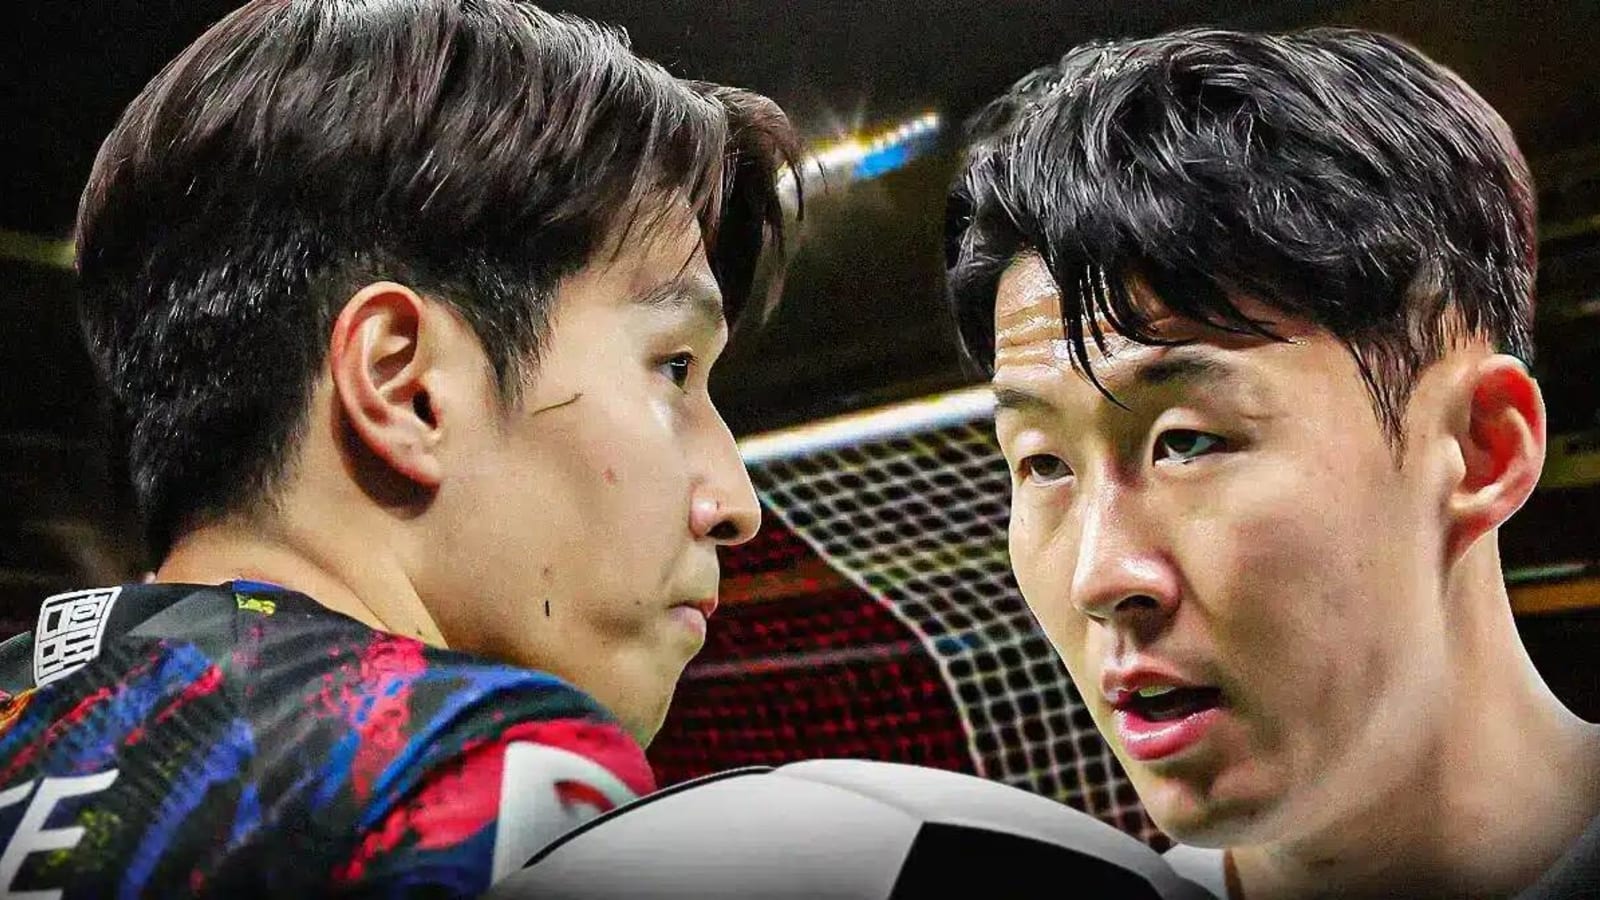 Tottenham star Son Heung-min dislocates finger in brawl with PSG’s Lee Kang-in